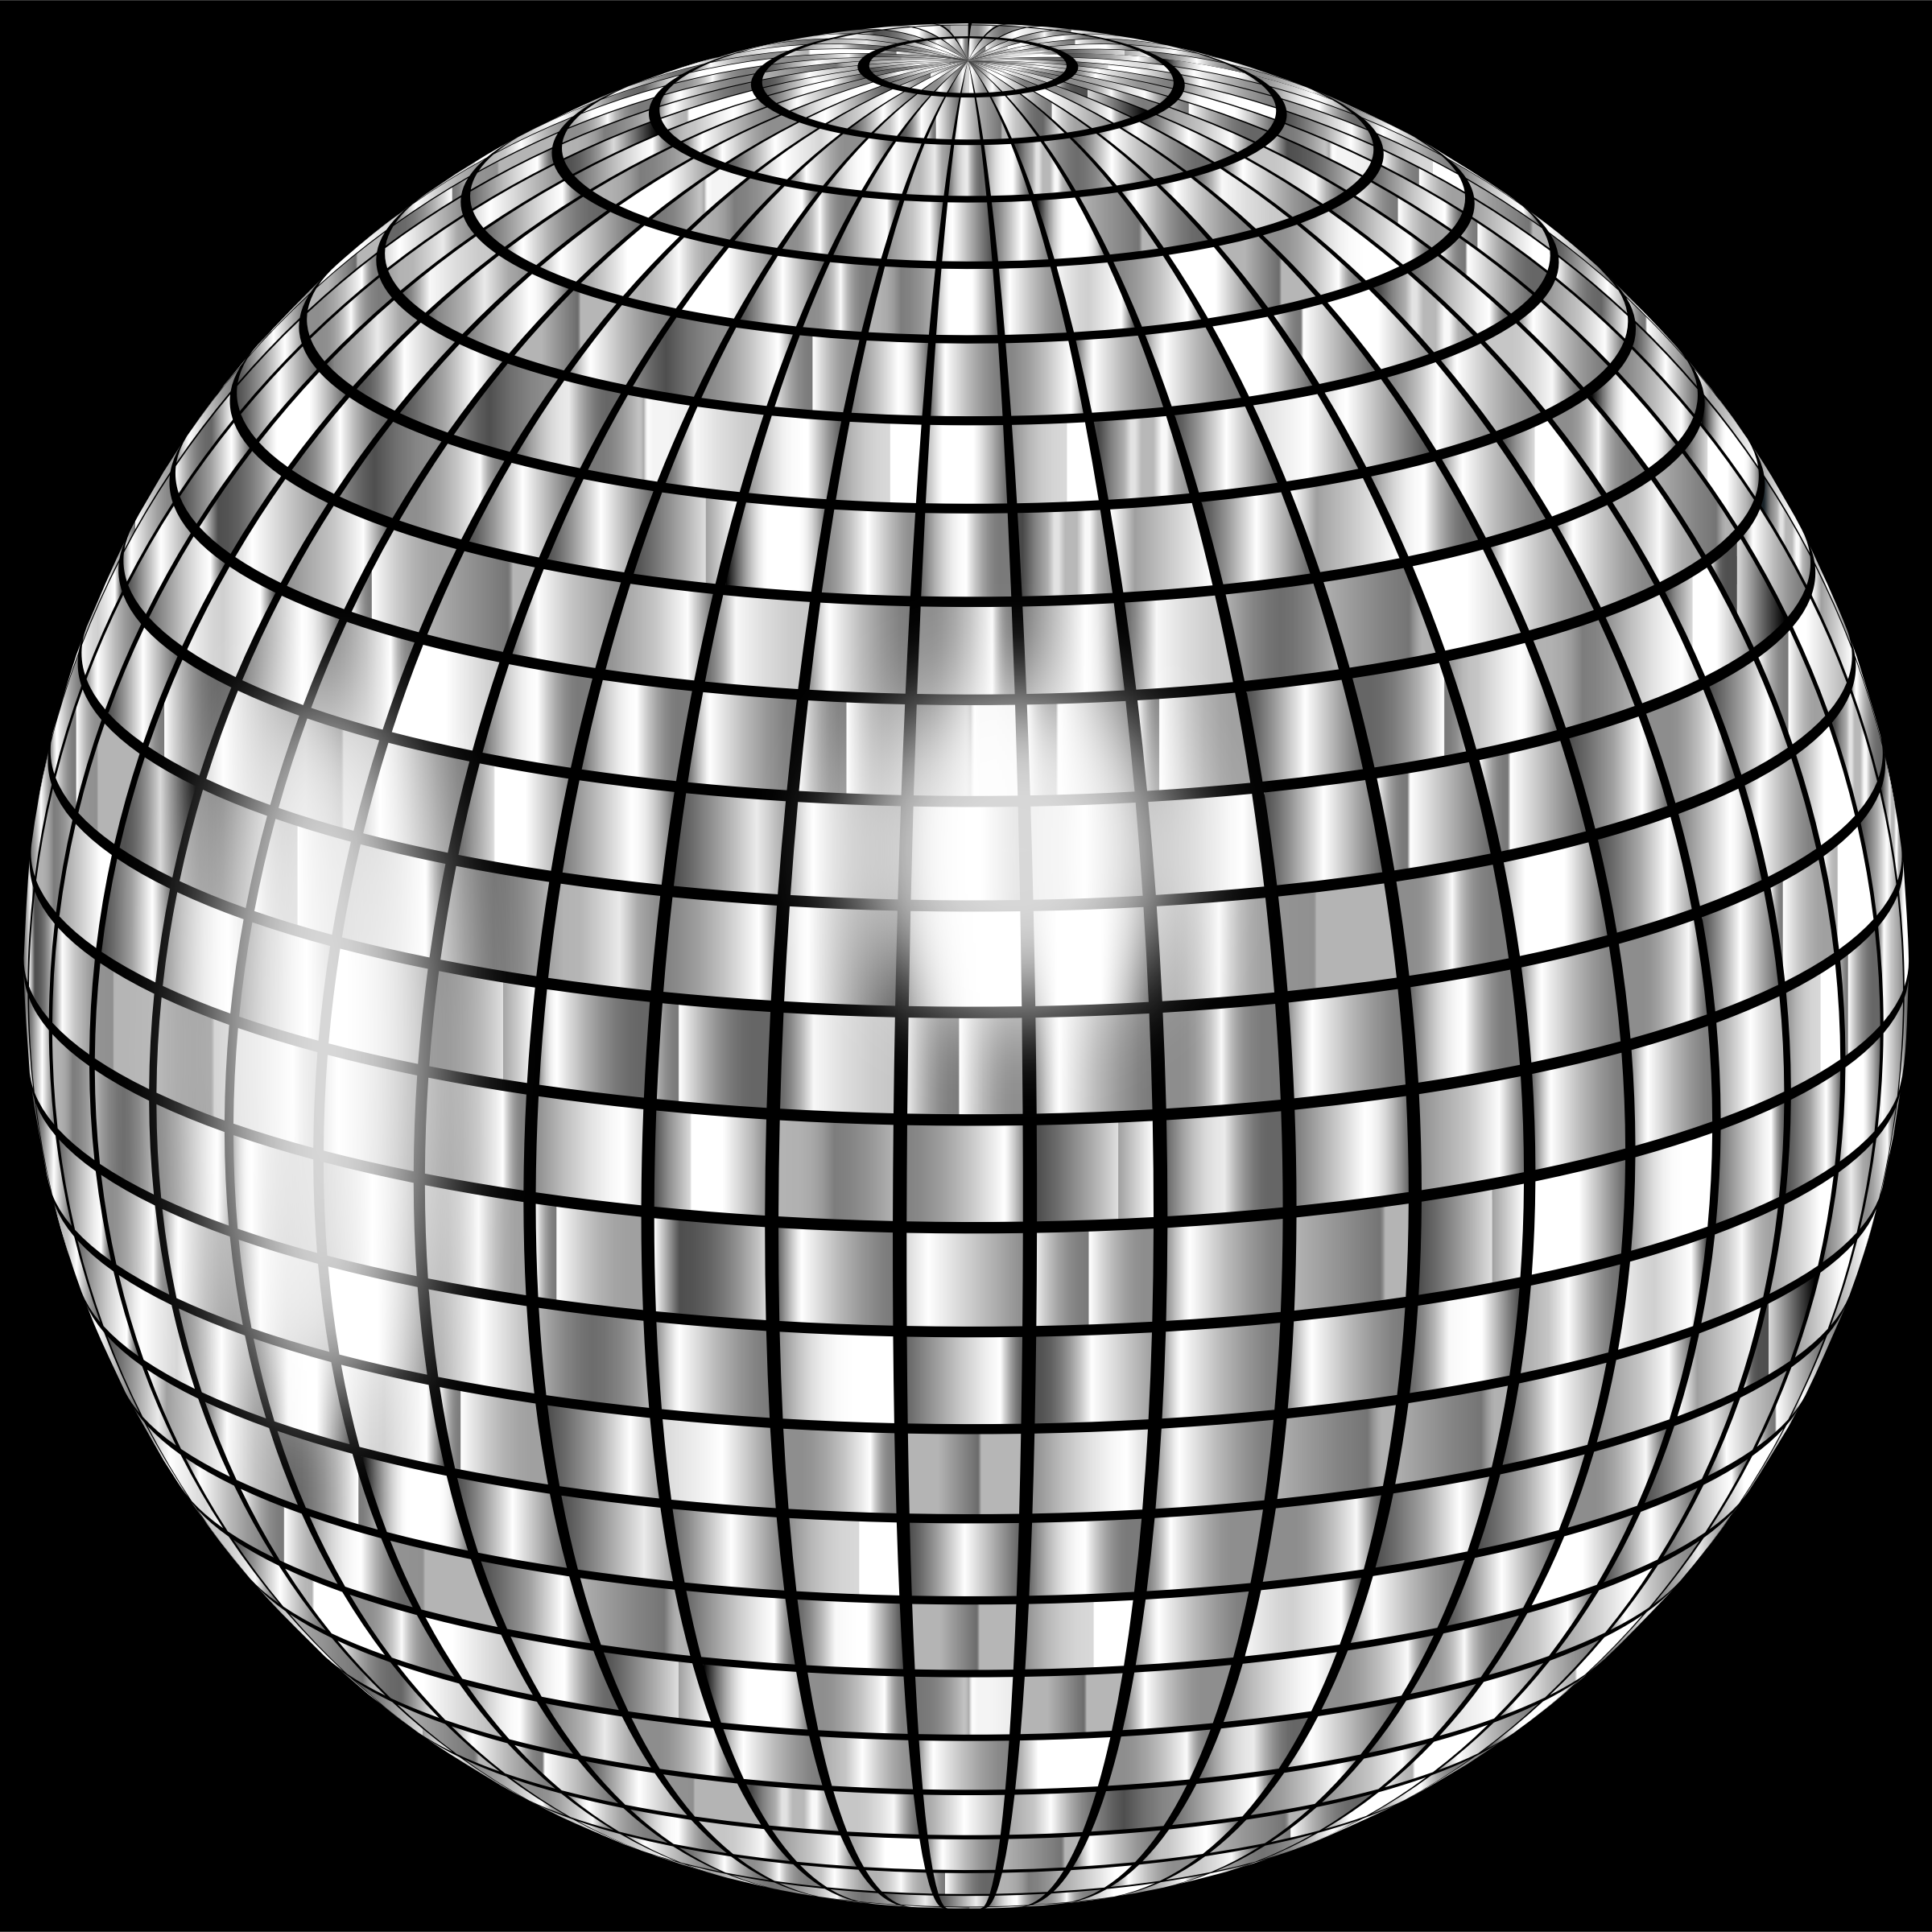 free clipart images disco ball - photo #27